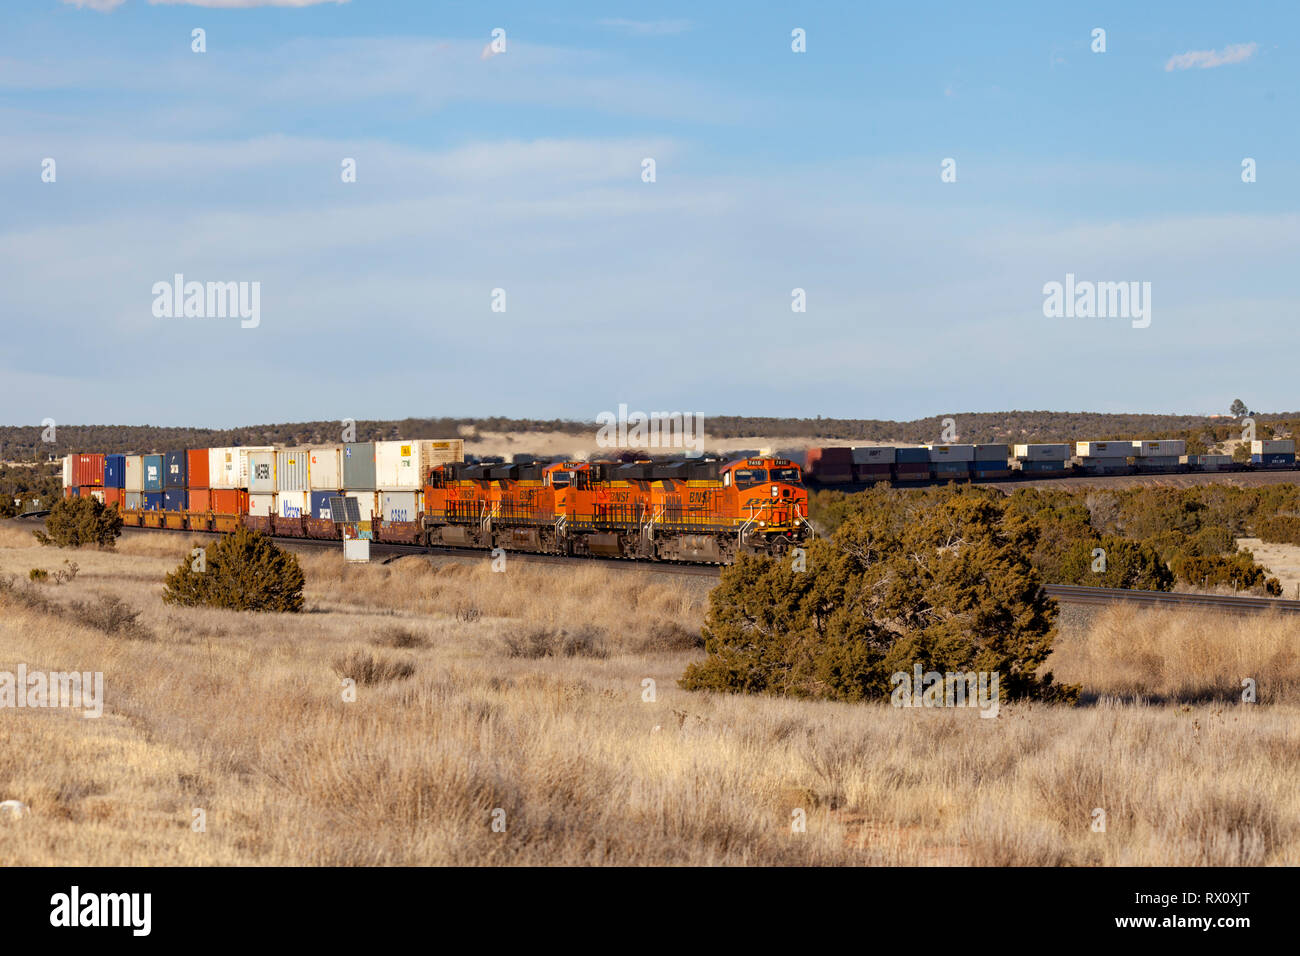 Freight train rounds a curve in New Mexico desert Stock Photo